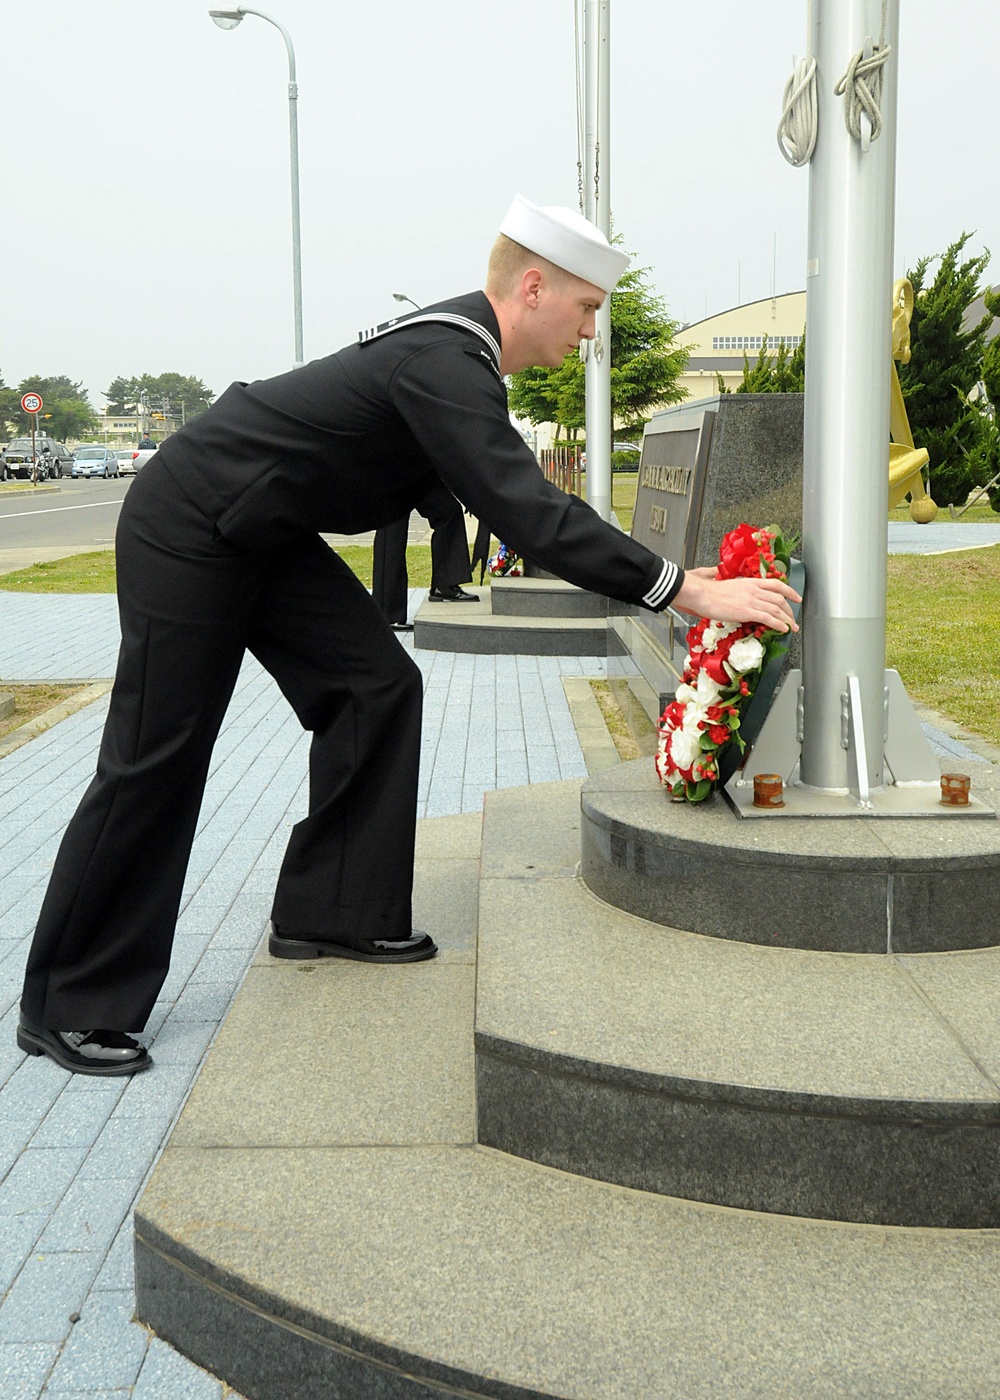 NAF Misawa honors 70th Anniversary of Battle of Midway